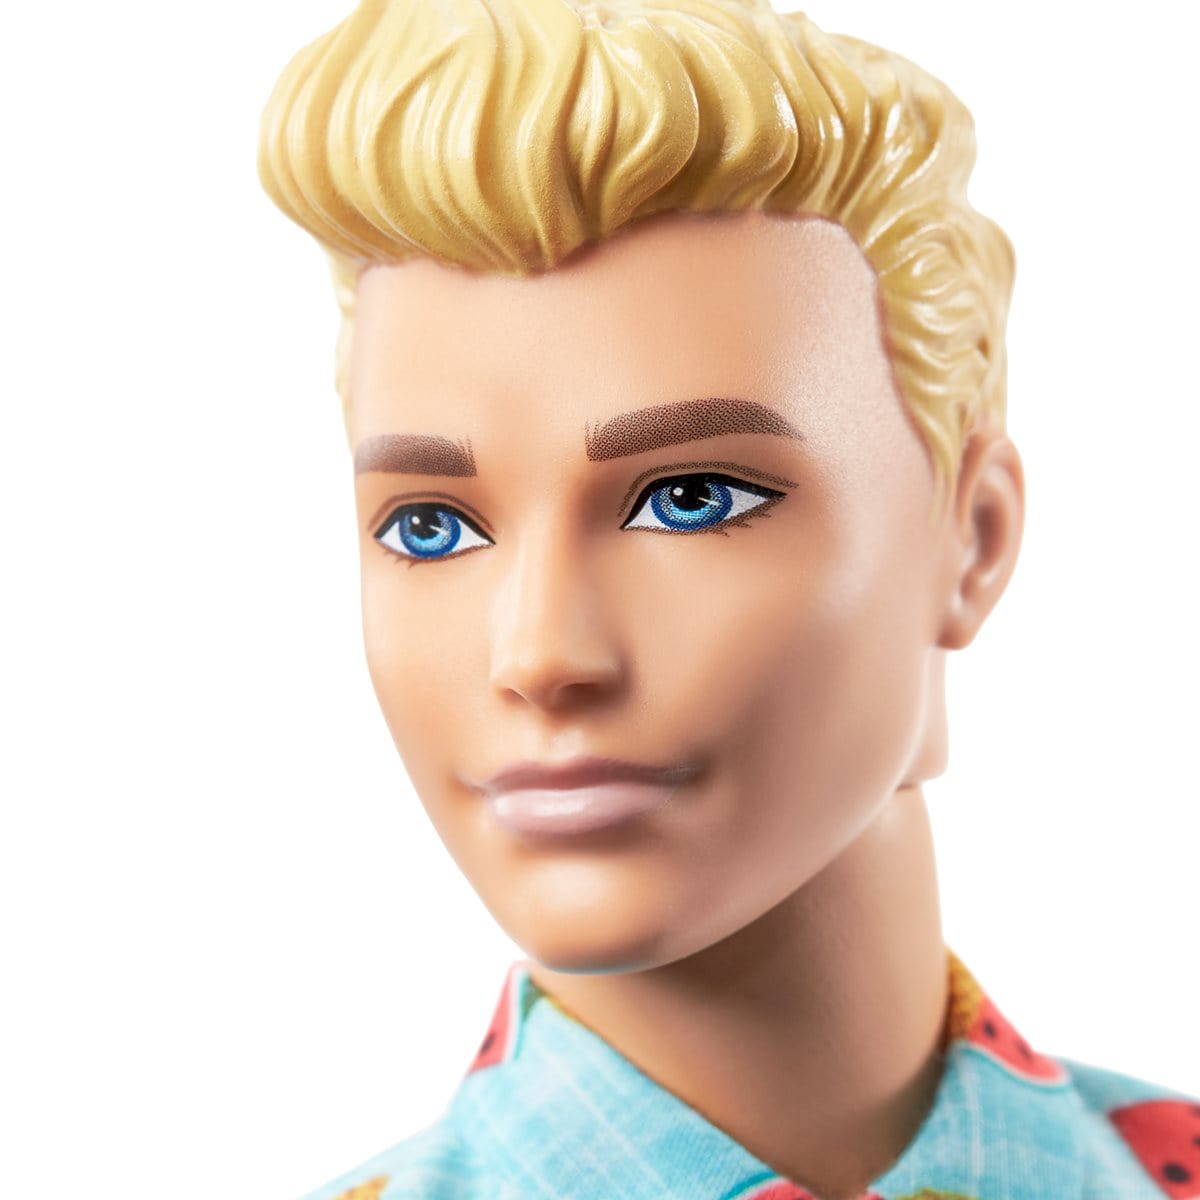 Barbie Ken Fashionistas Doll #152 with Sculpted Blonde Hair